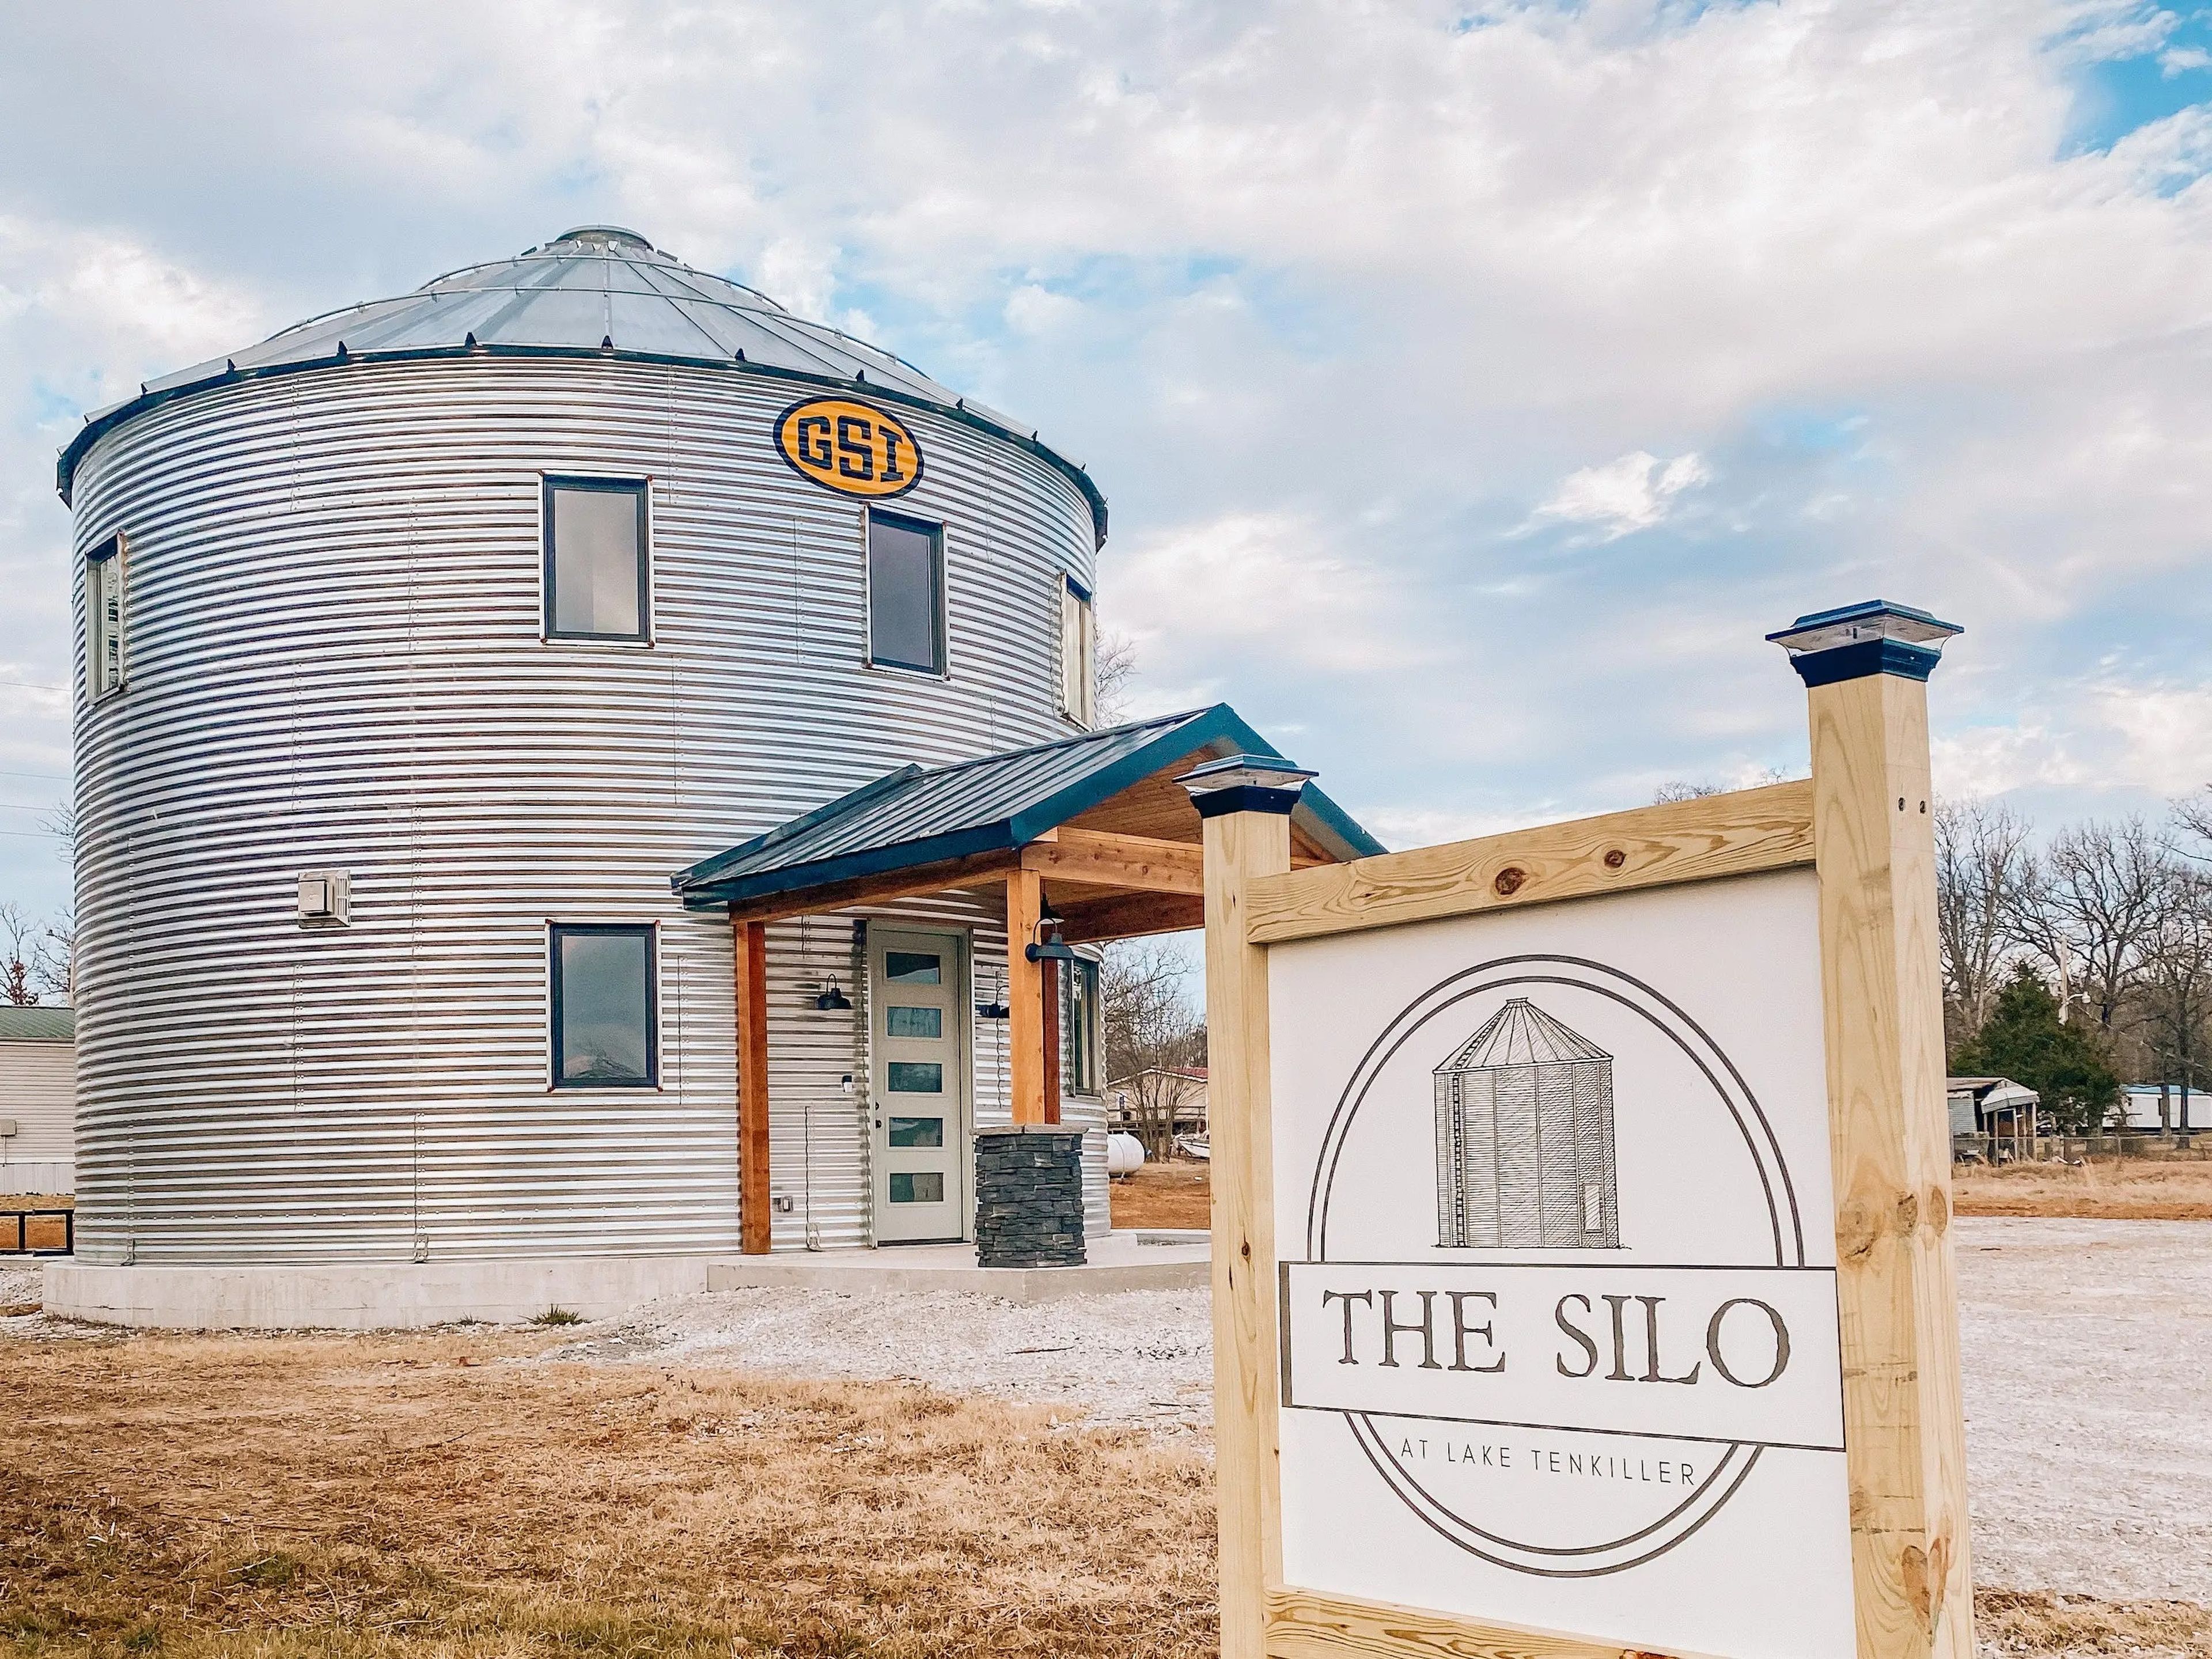 A sign on the property showing "The Silo" logo with the home in the background.